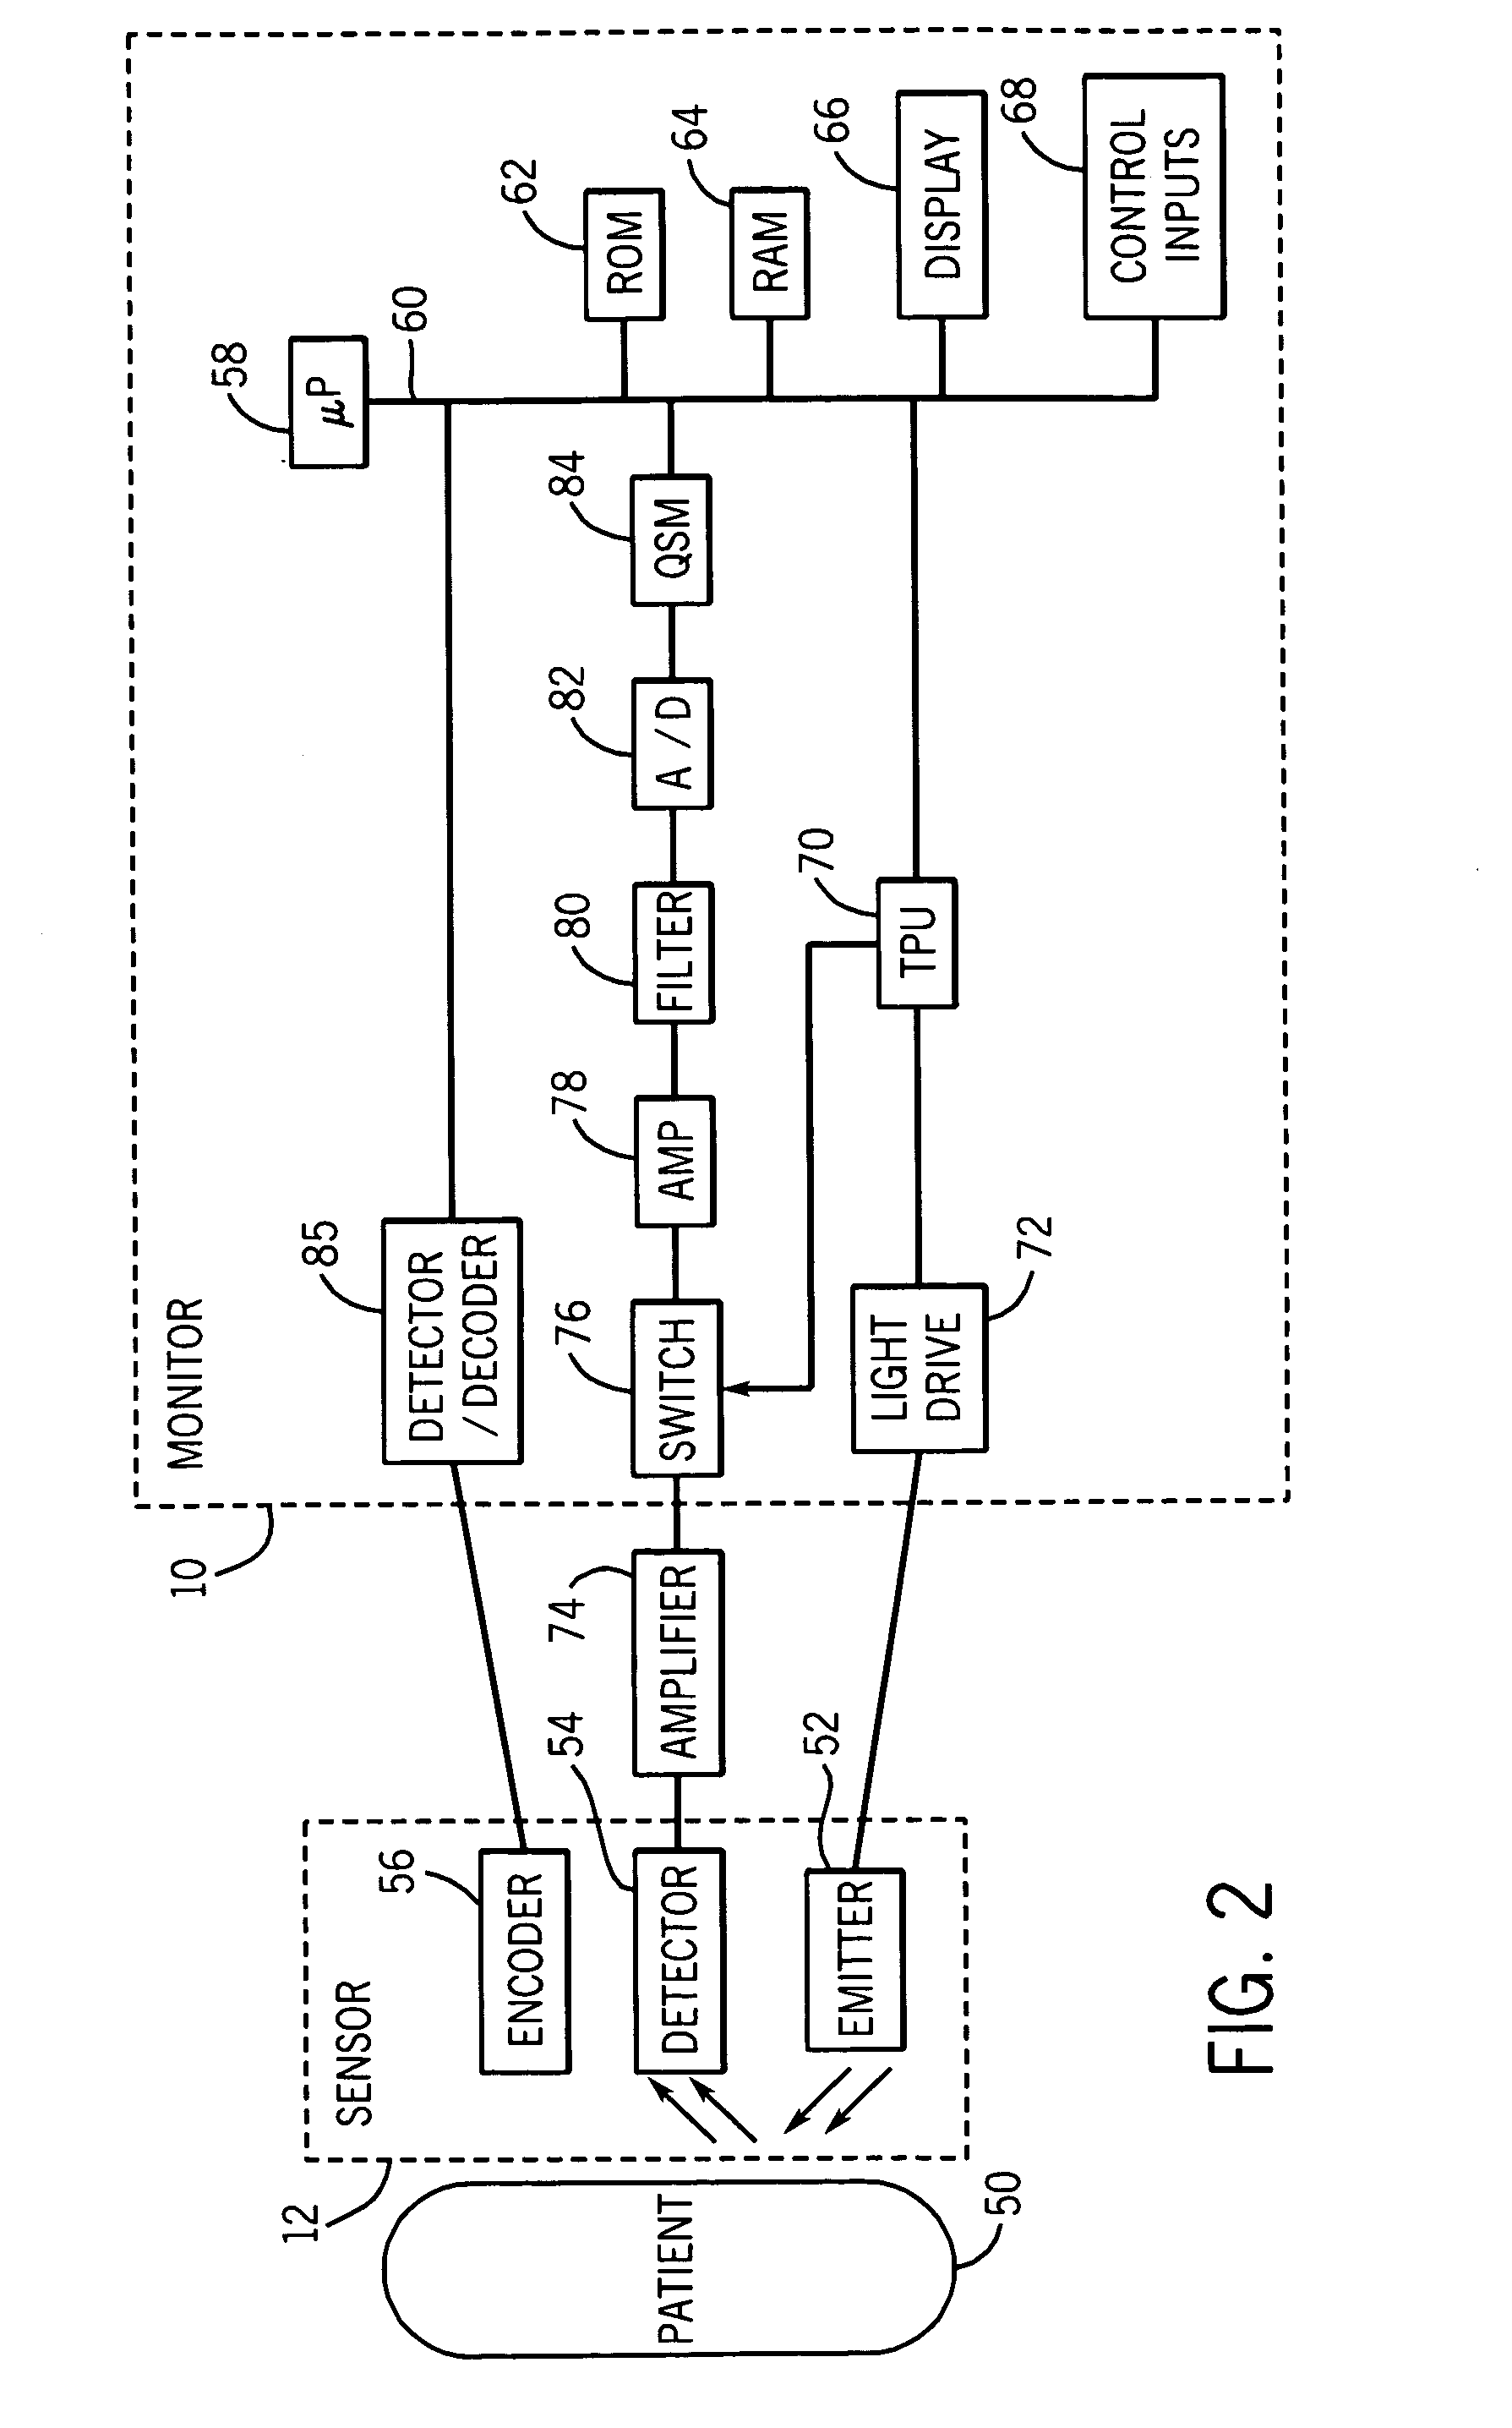 Method and apparatus for detection of venous pulsation